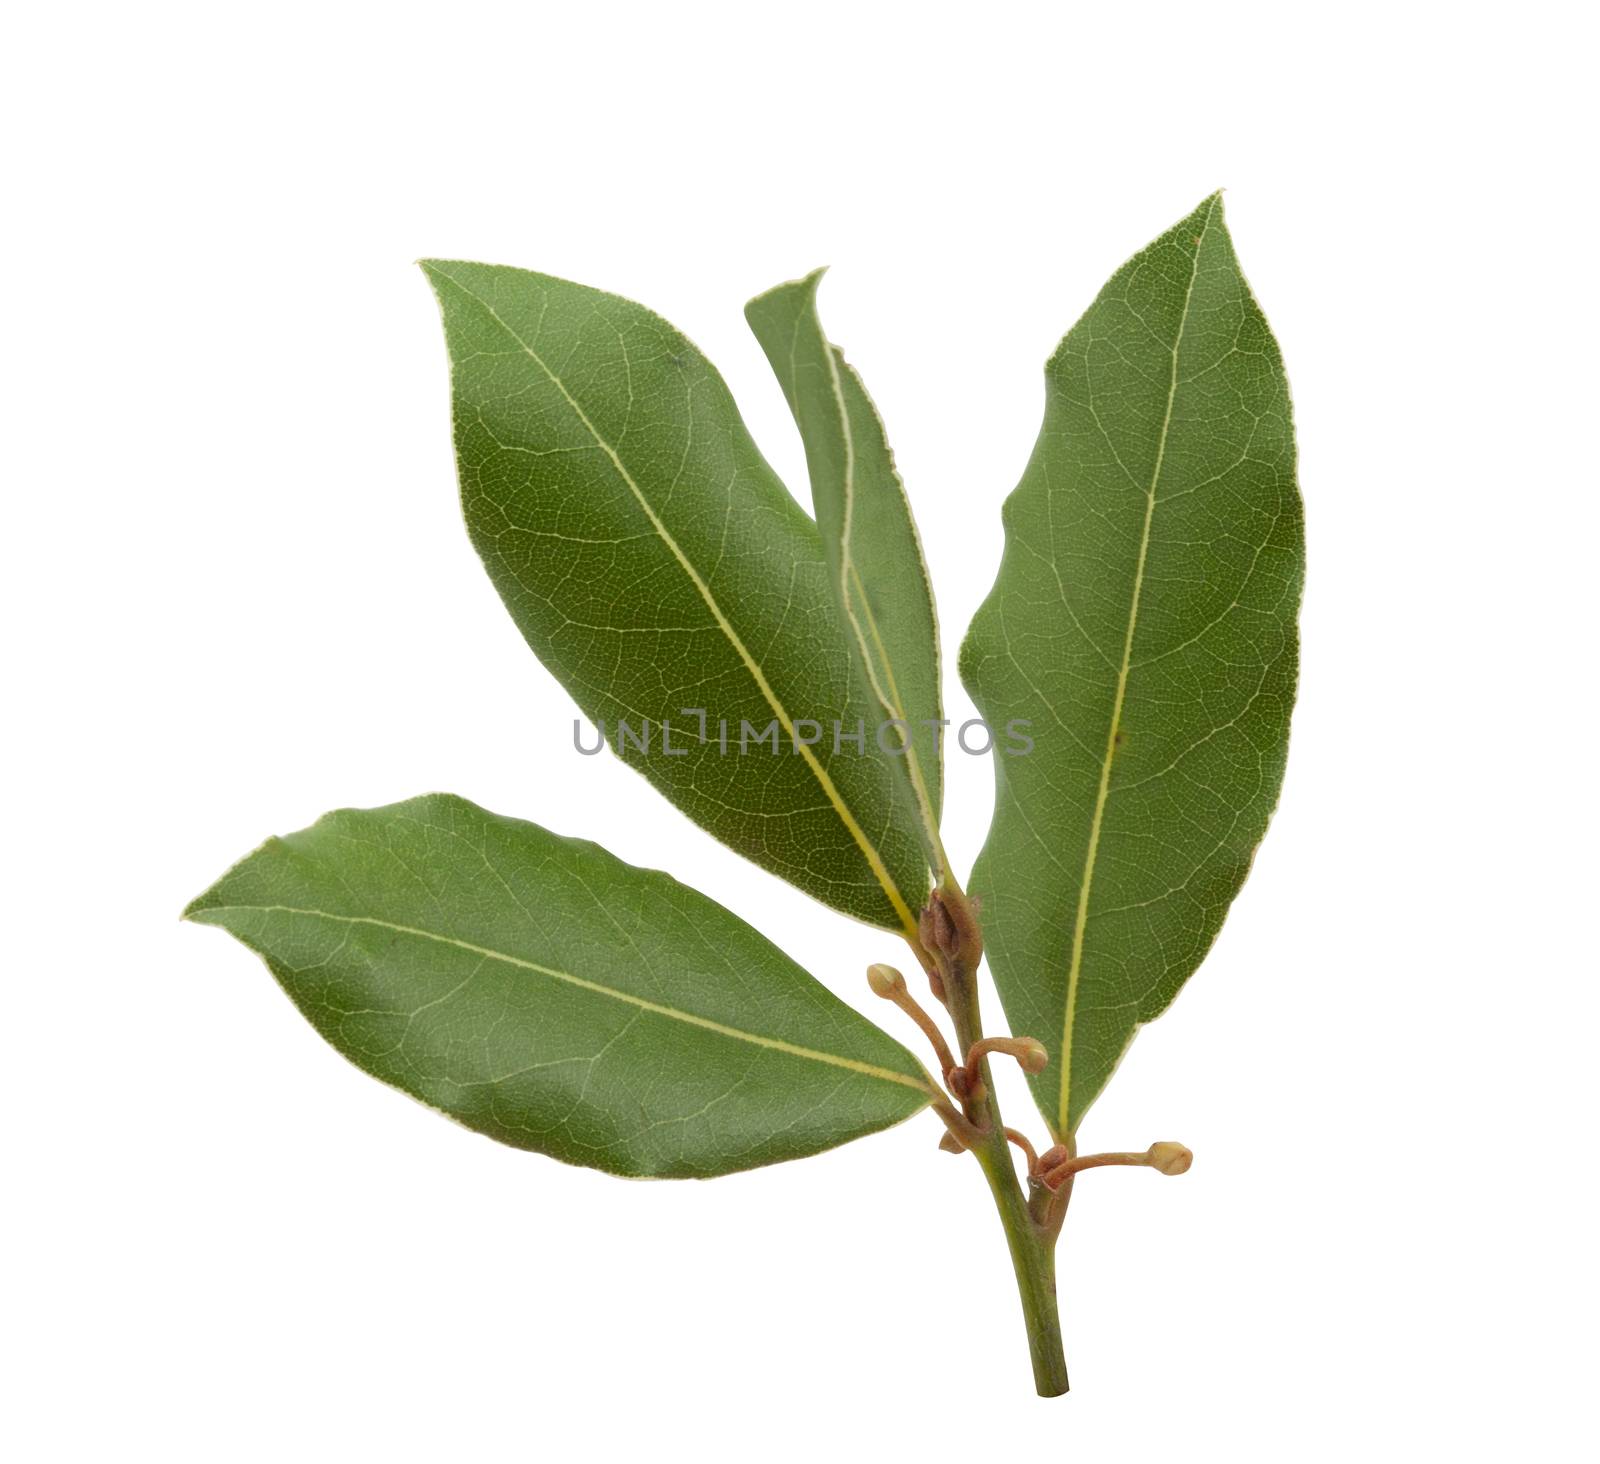 Branch of bay leaf by Angorius